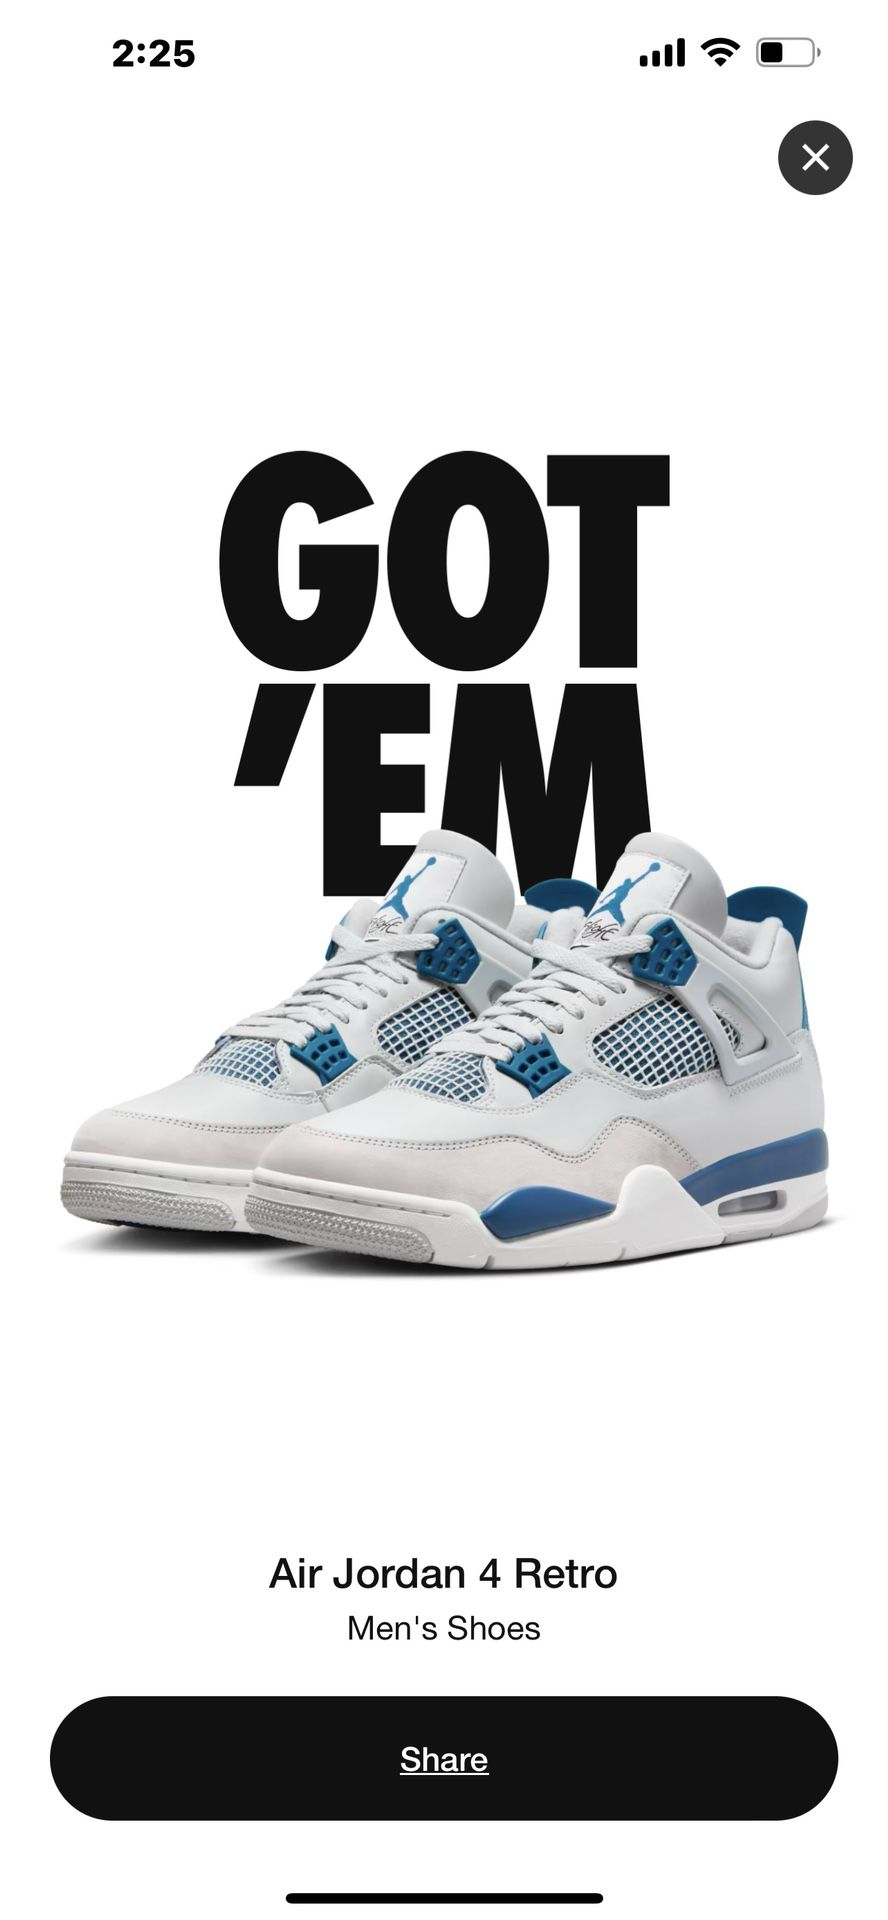 Jordan 4 “military blue” size 9.5, 11.5, and 12